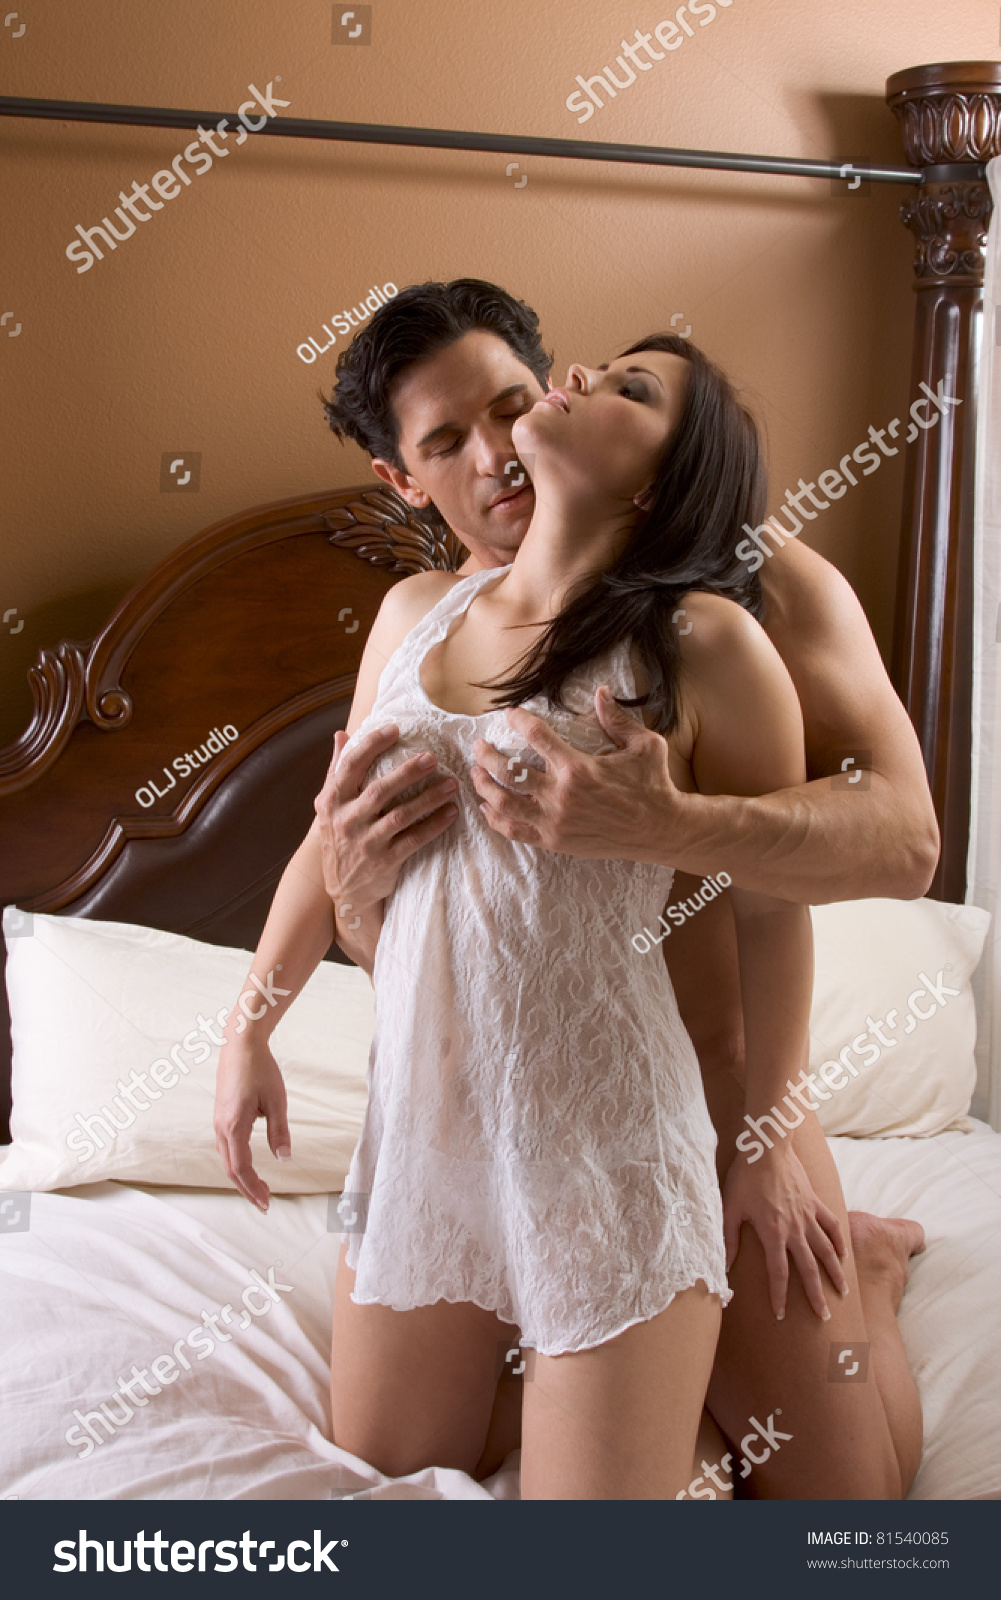 Nude couple in love making